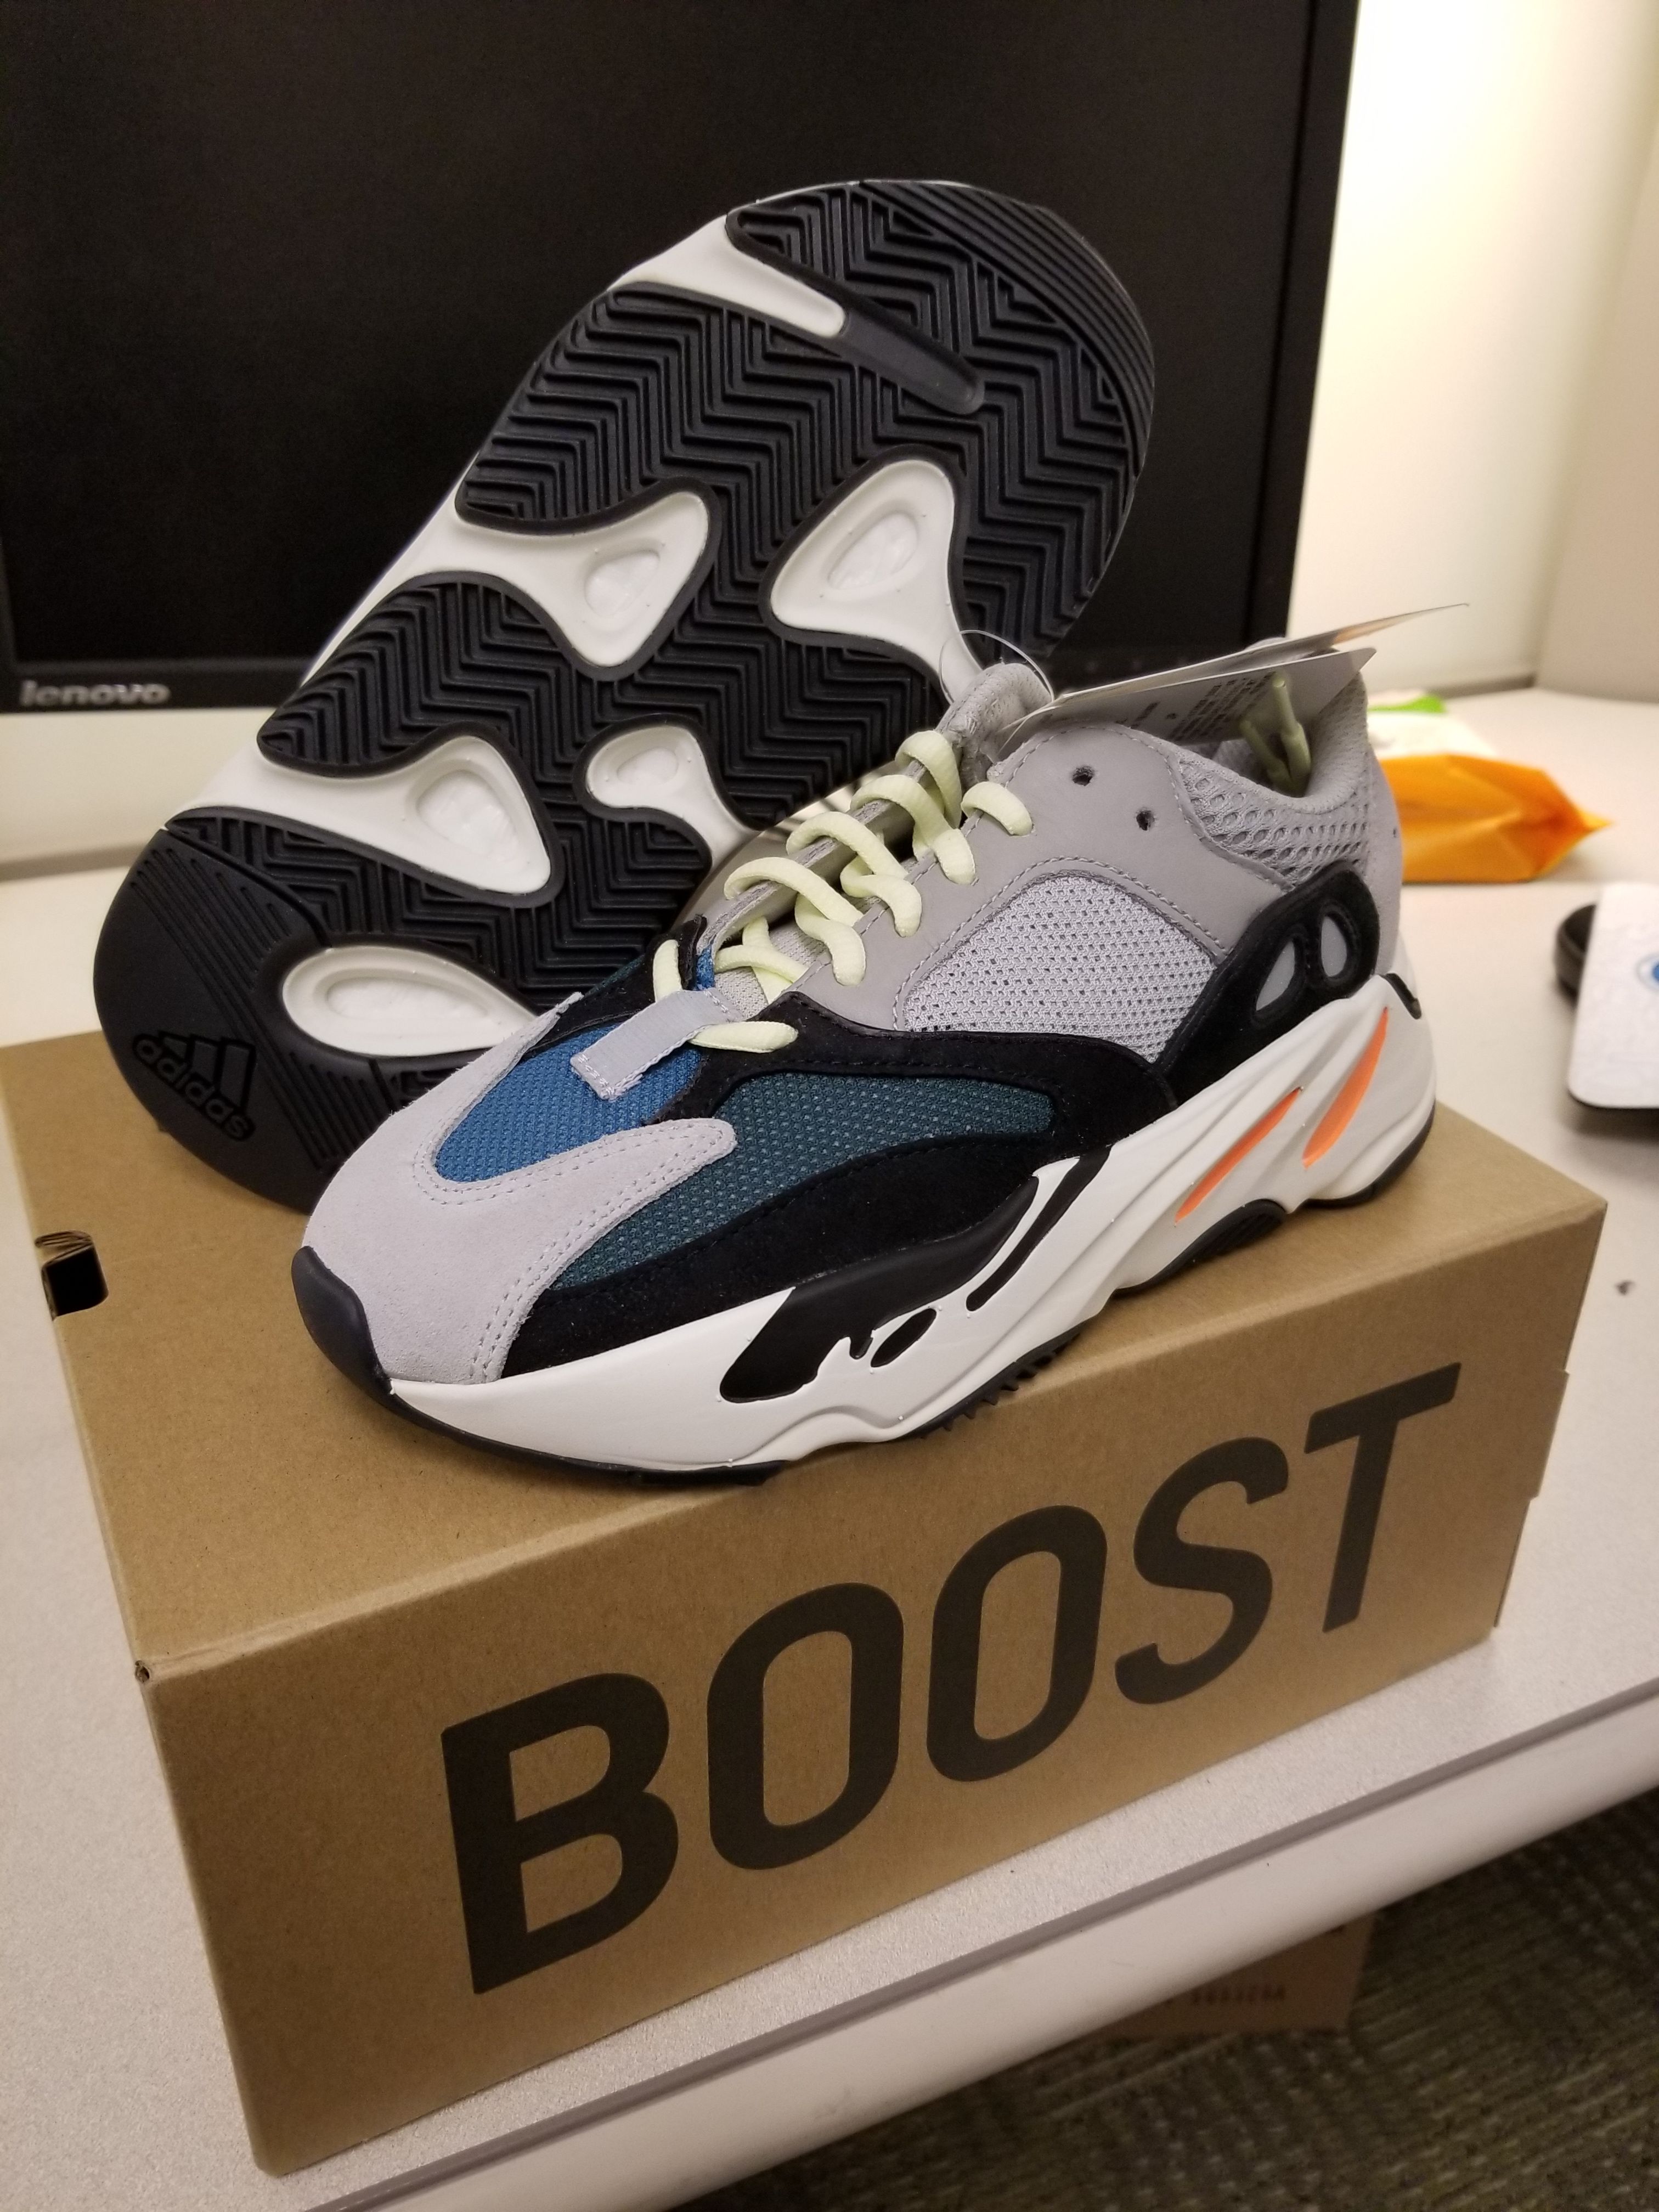 Yeezy Wave Runner sizes 10.5, 4.5, and 4